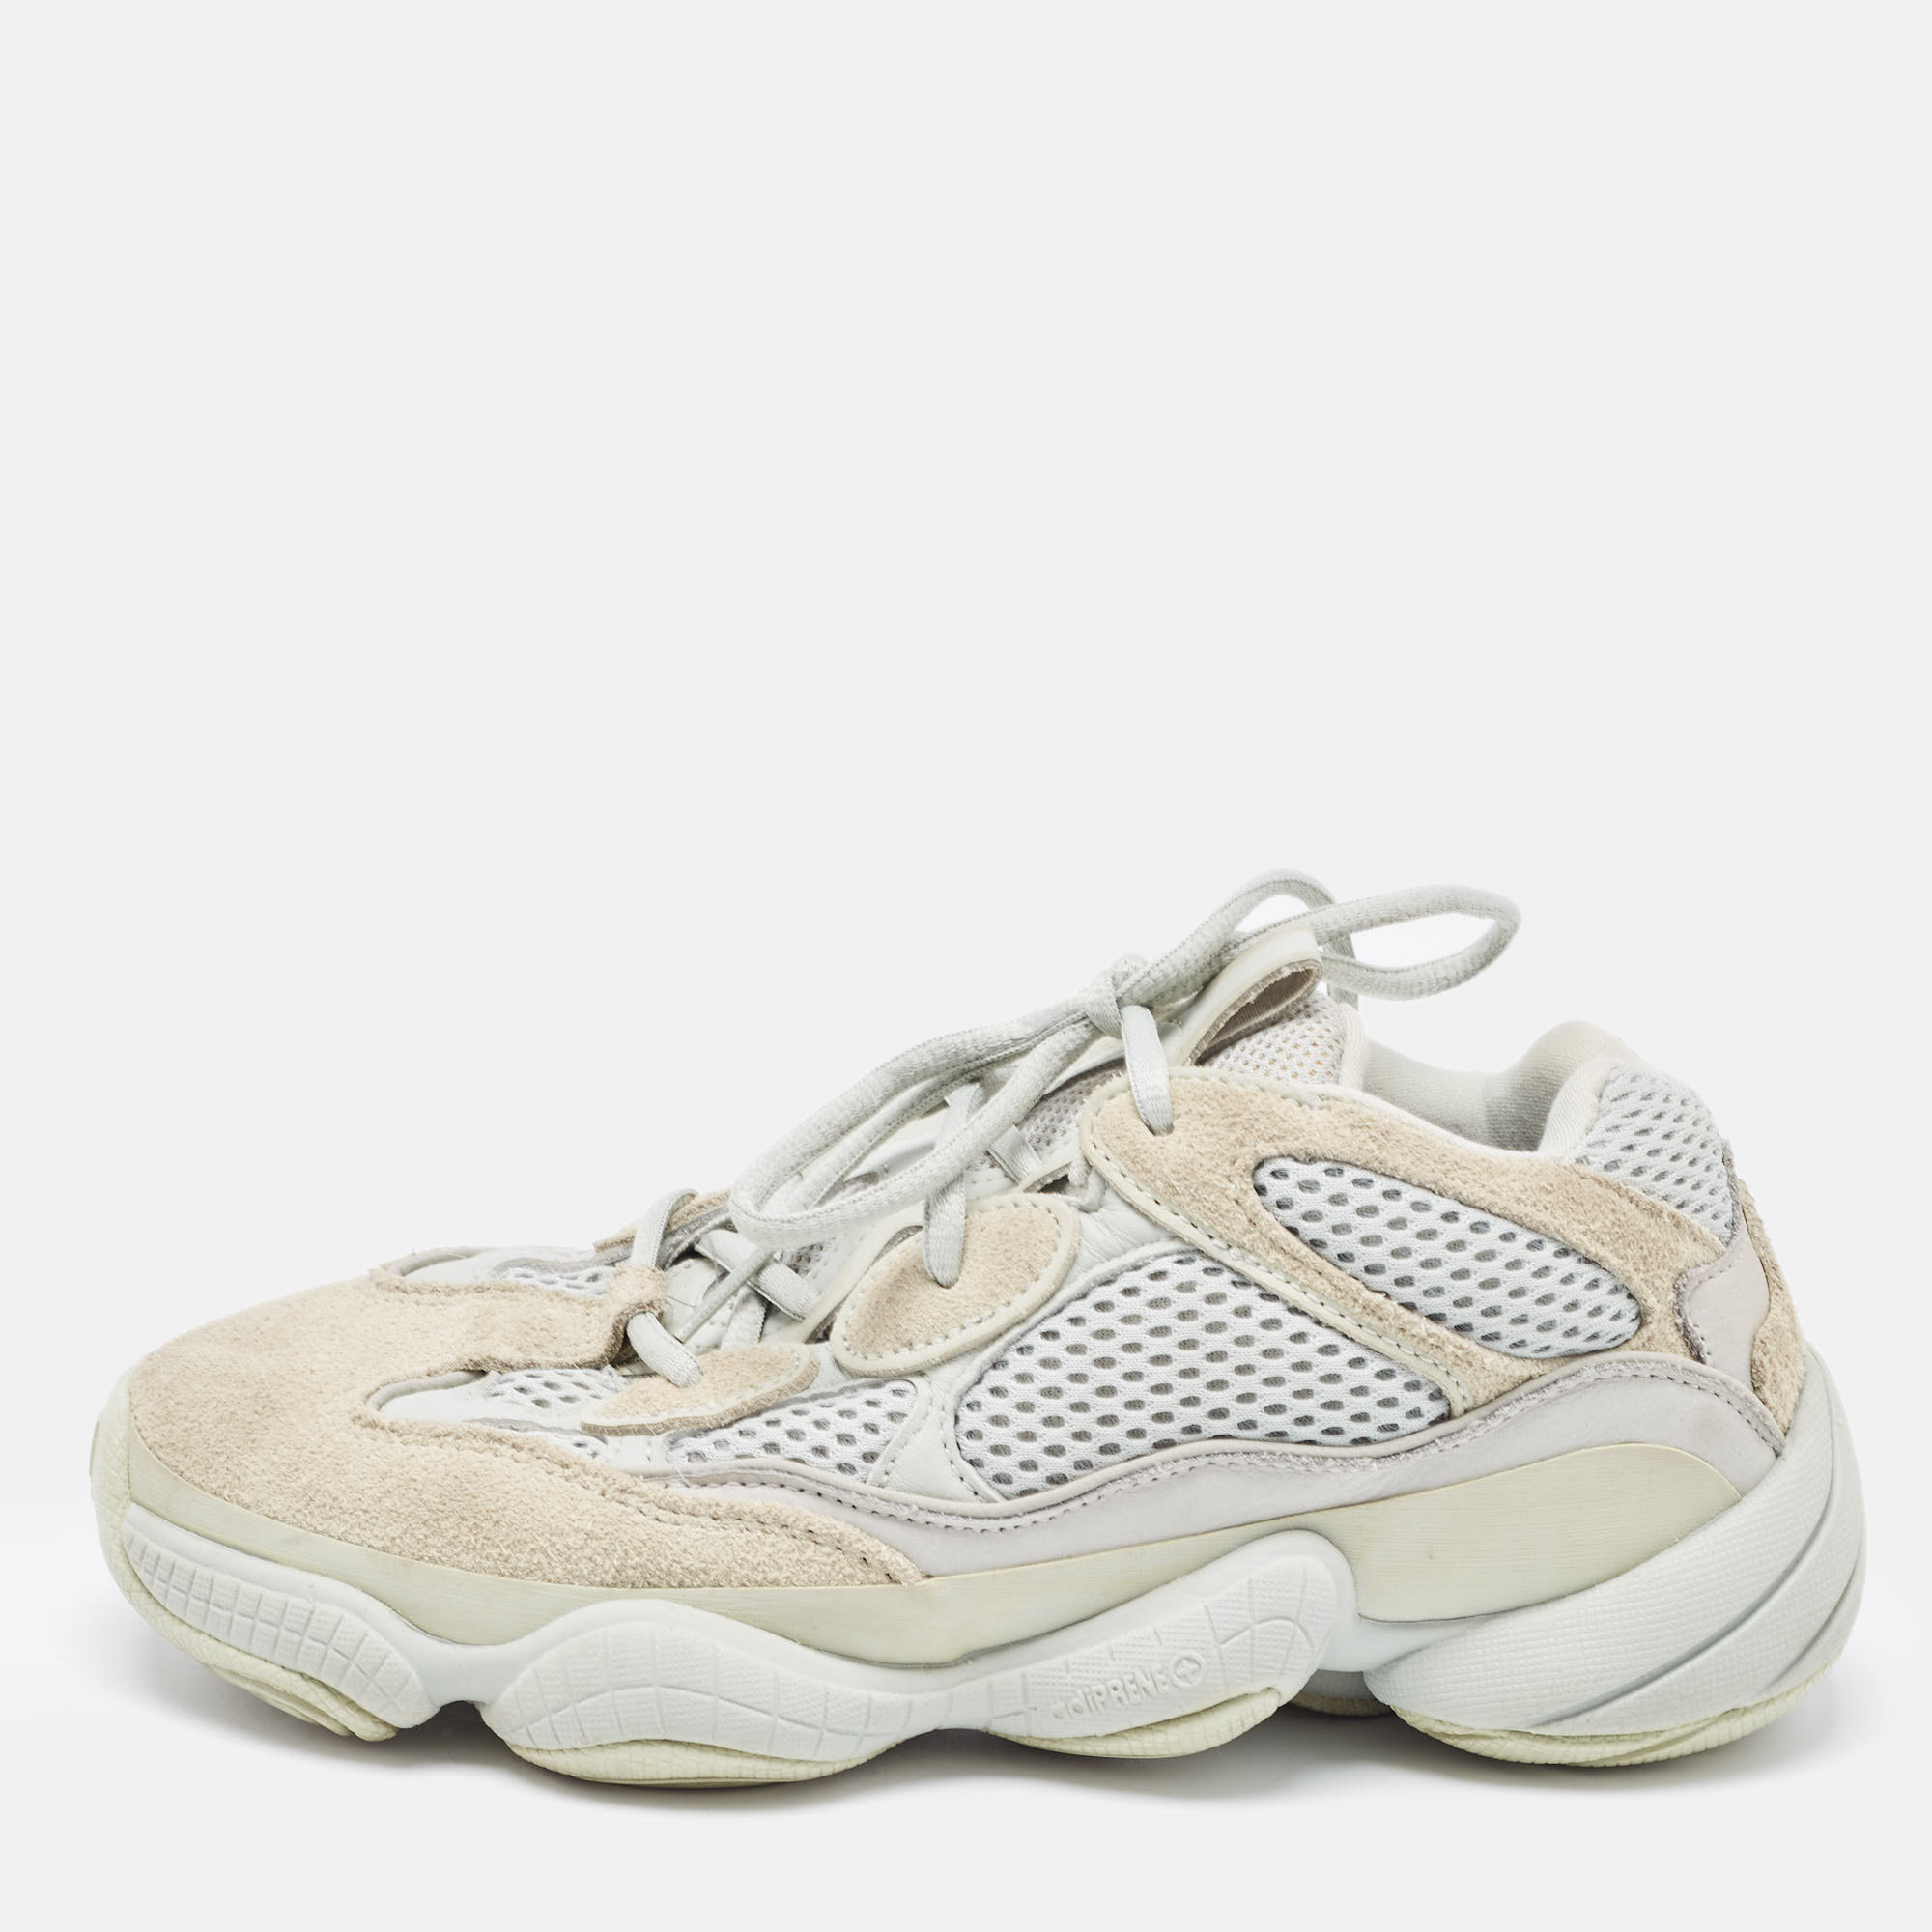 Pre-owned Yeezy X Adidas Two Tone Suede And Mesh Yeezy 500 Salt Sneakers Size 38 In Green